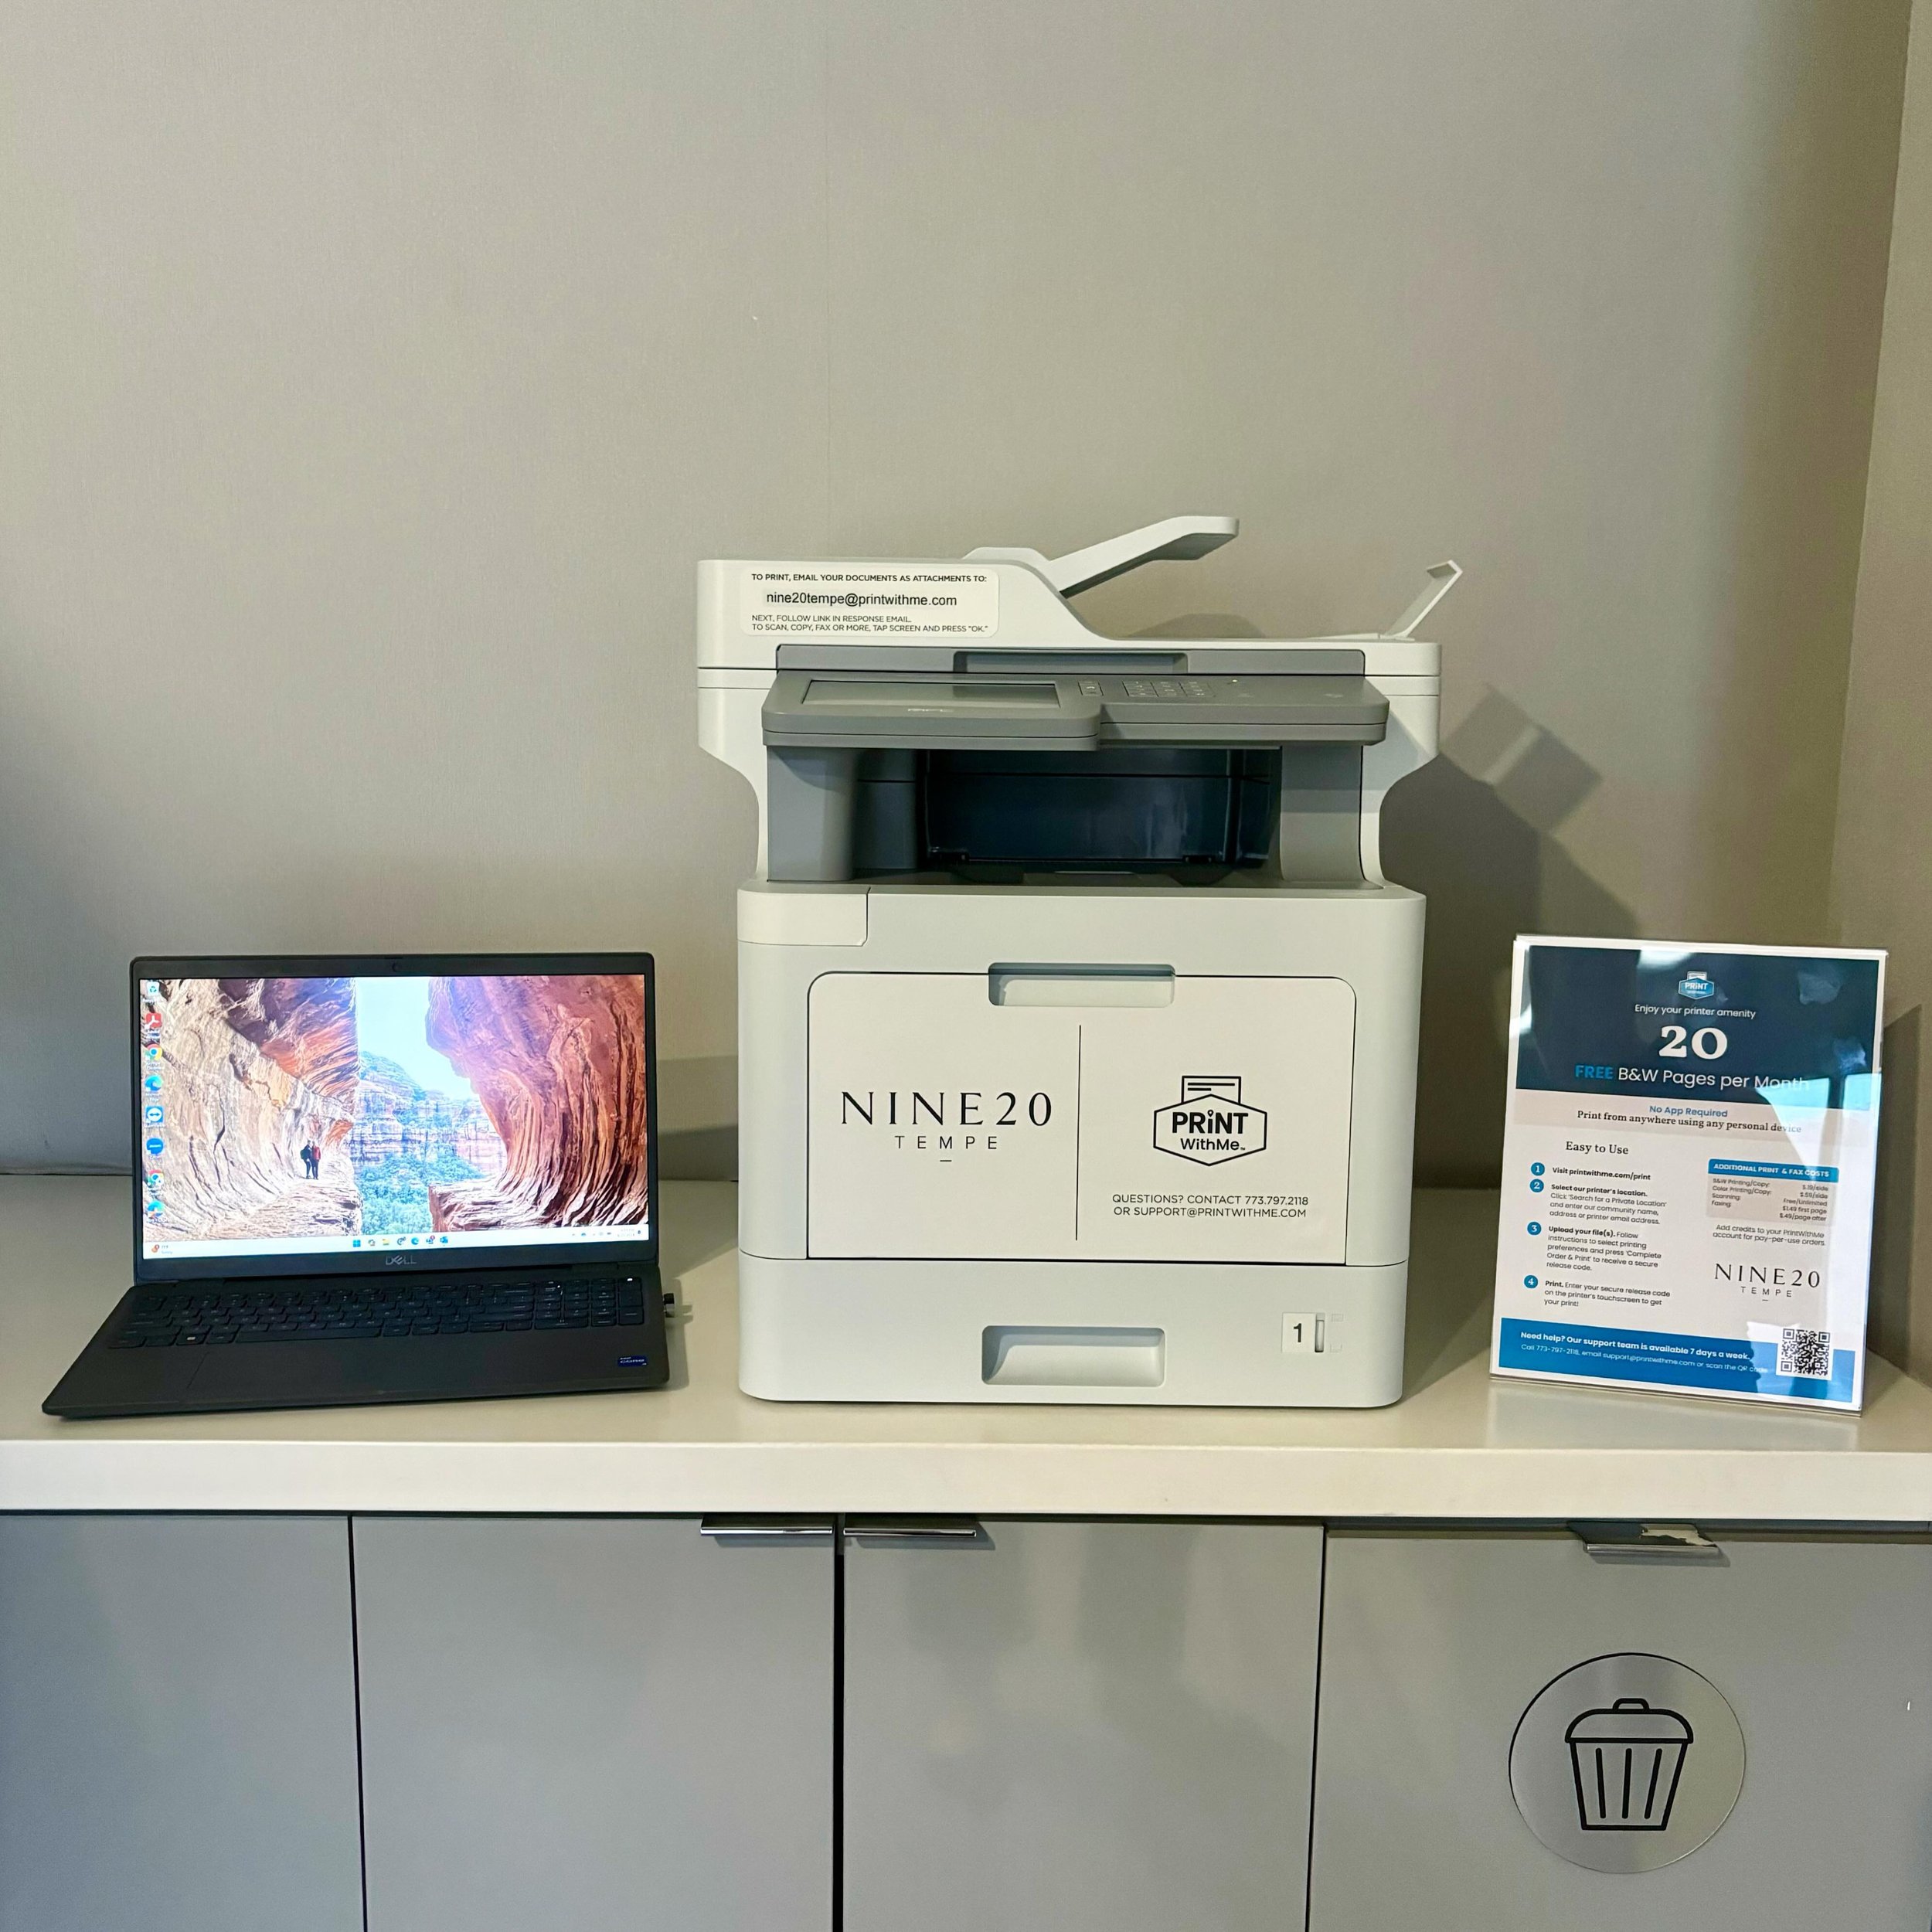 📲💻🖨️ Just in time for finals week - we&rsquo;re so excited to introduce our residents to @withmeamenities, your very own free printing amenity! Current Nine20 residents can now wirelessly print documents from any digital device using the brand new